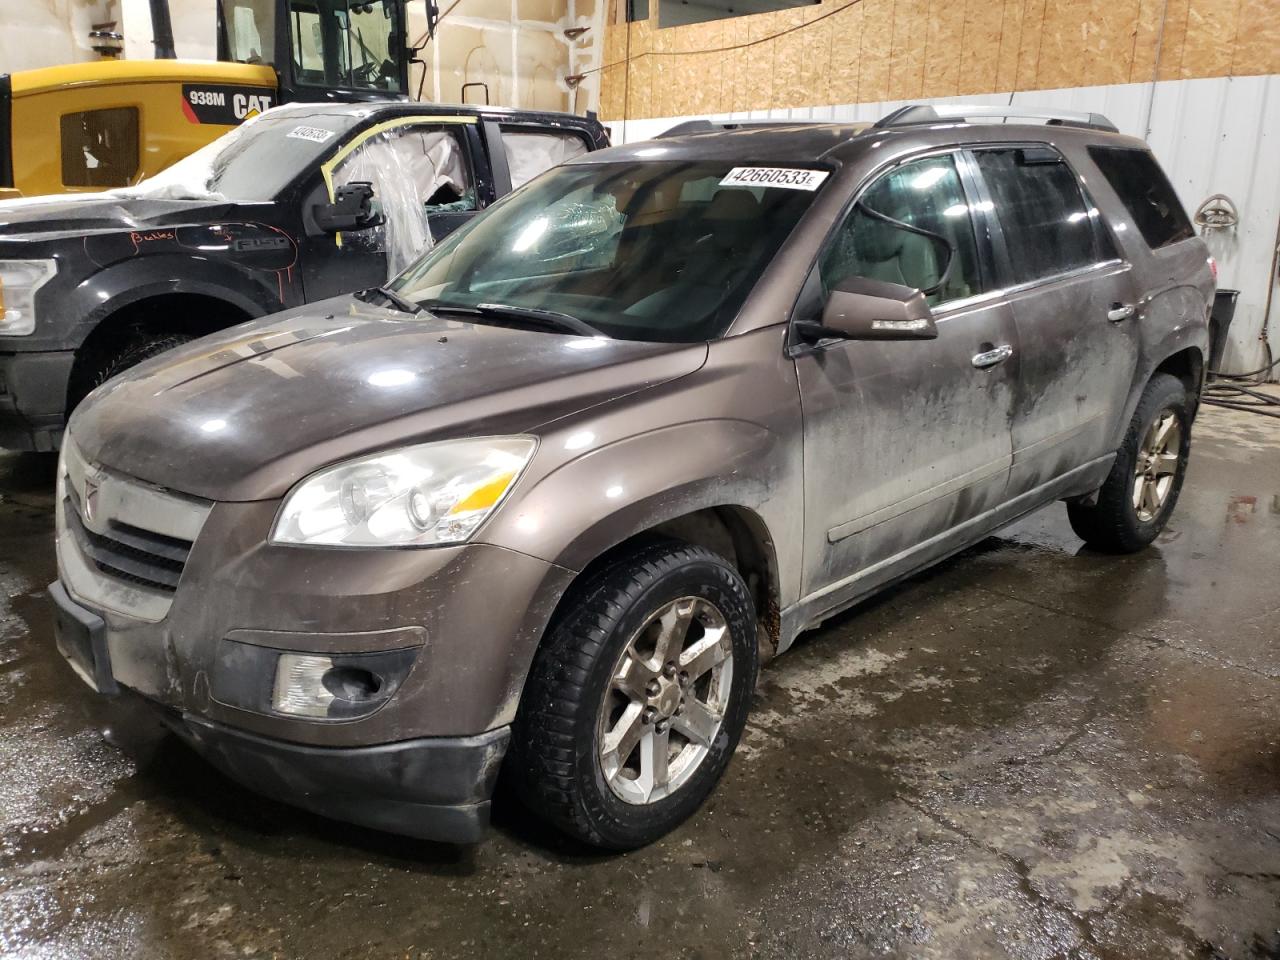 2010 Saturn Outlook XR for sale at Copart Anchorage, AK Lot #42660*** |  SalvageReseller.com